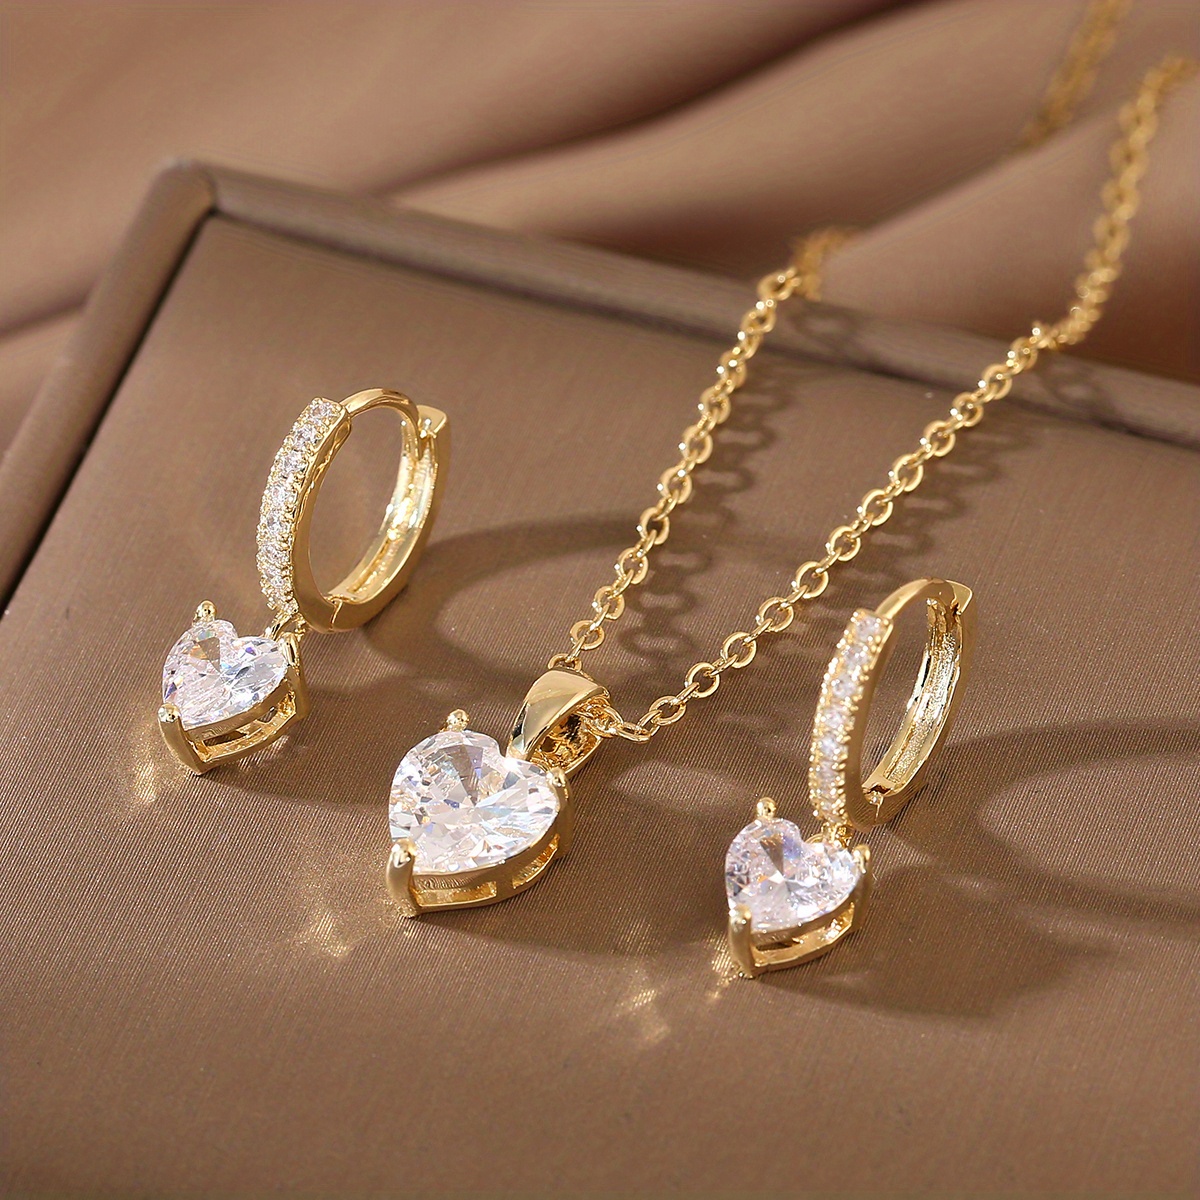 Gold Necklace and Earrings Sets